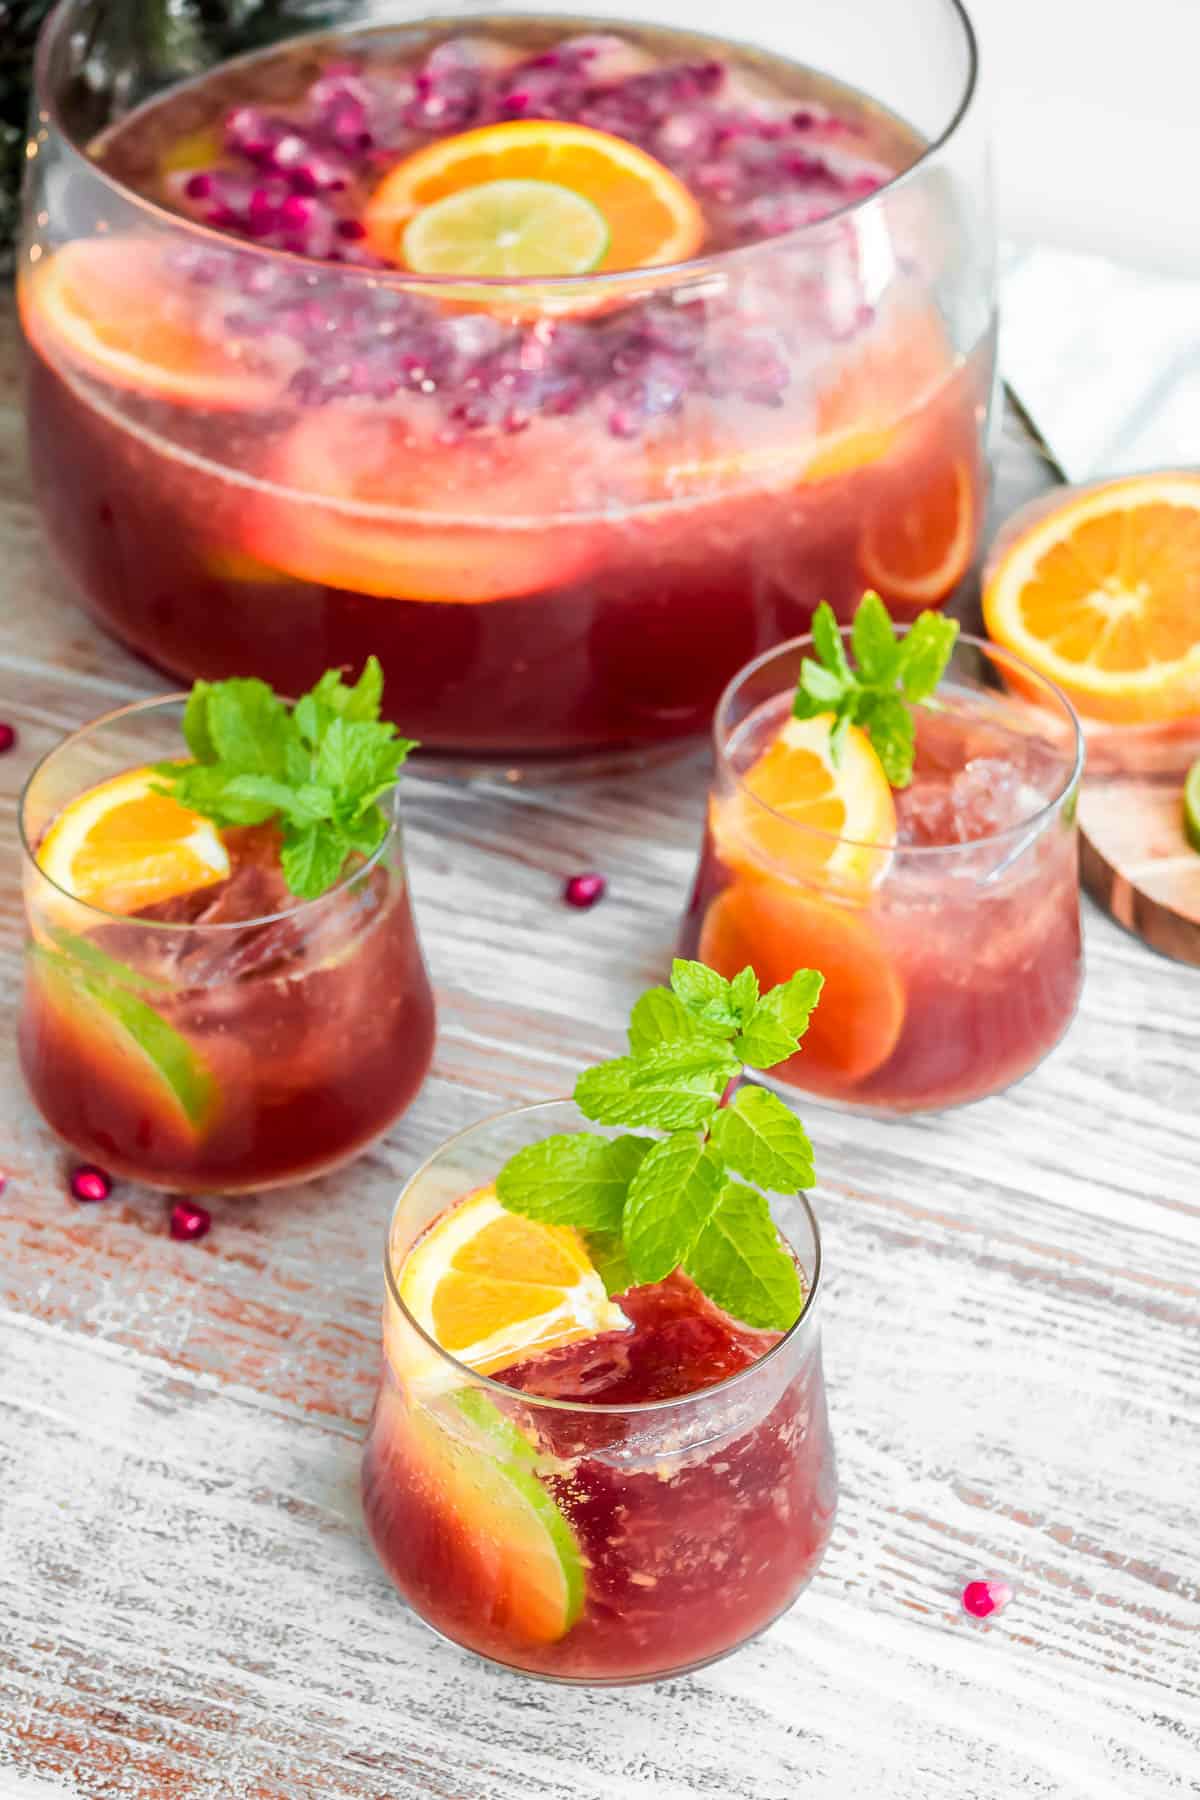 three glasses of holiday punch garnished with orange and lime slices and mint, in front of a bowl of the punch, and a cutting board containing more slices oranges.